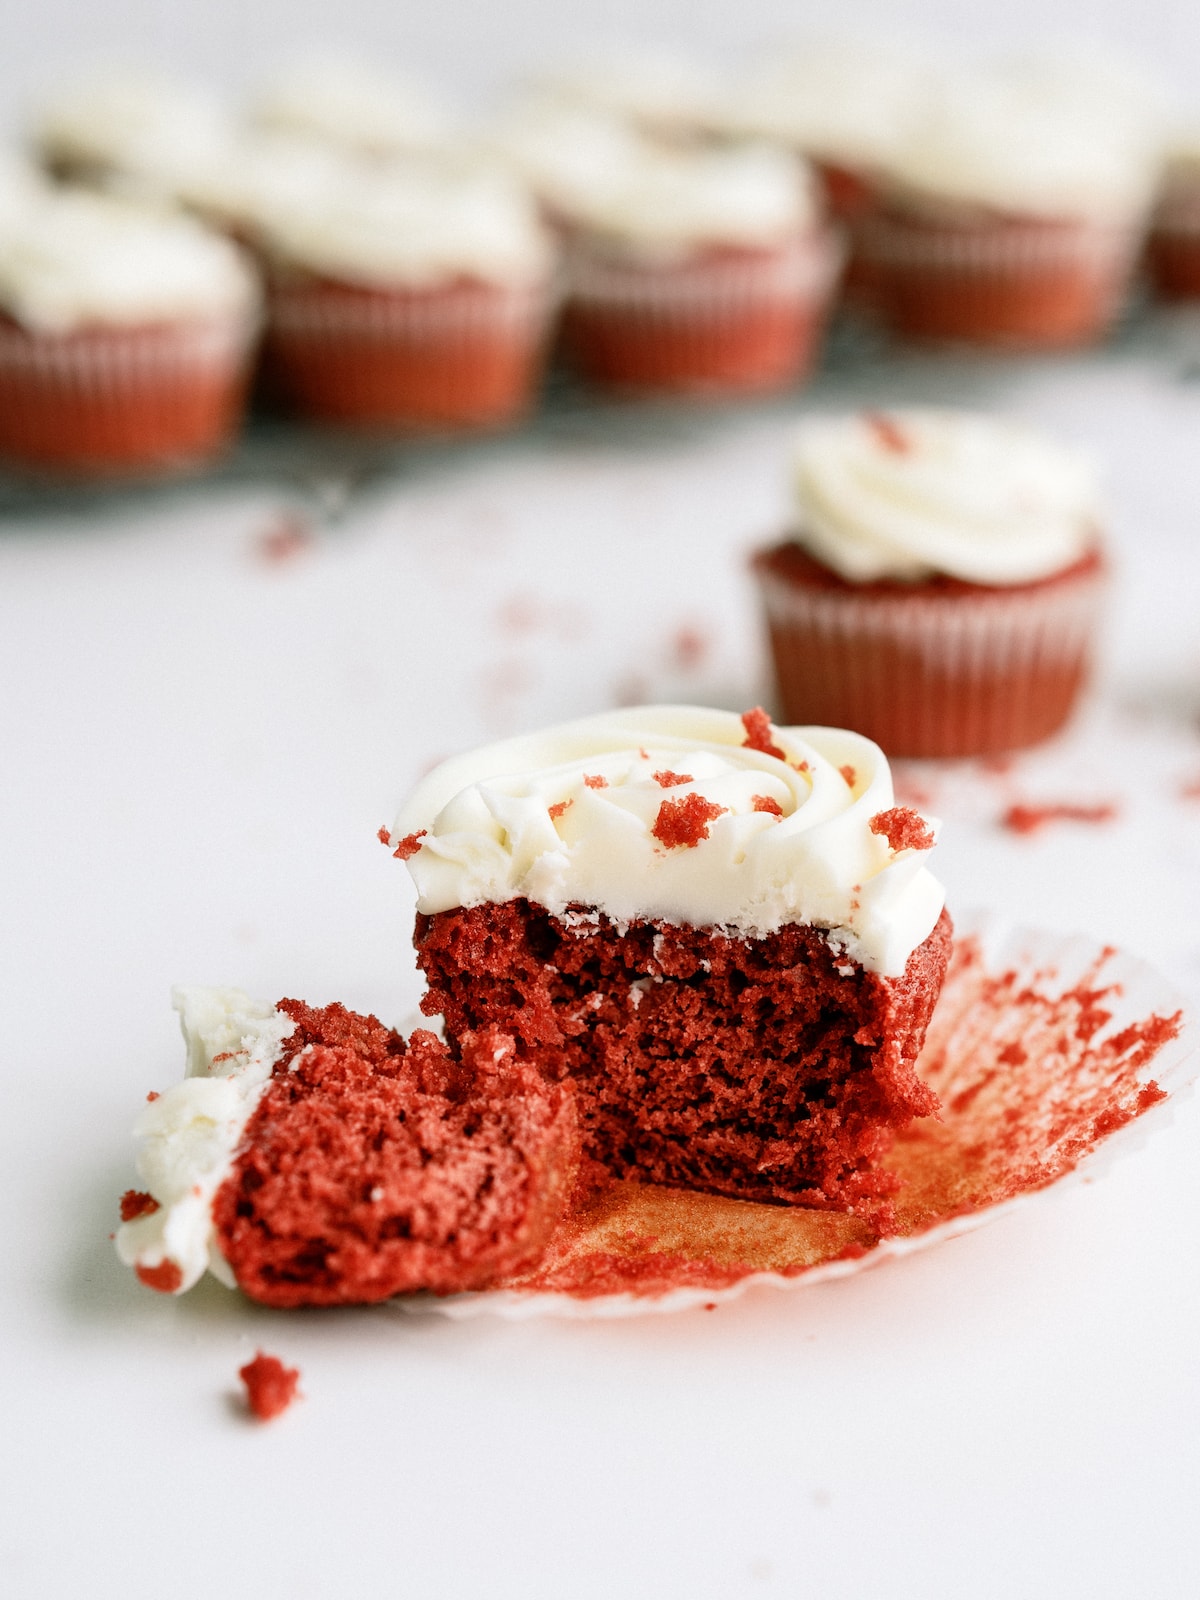 red velvet cupcake unwrapped and cut in half with cupcakes in the background